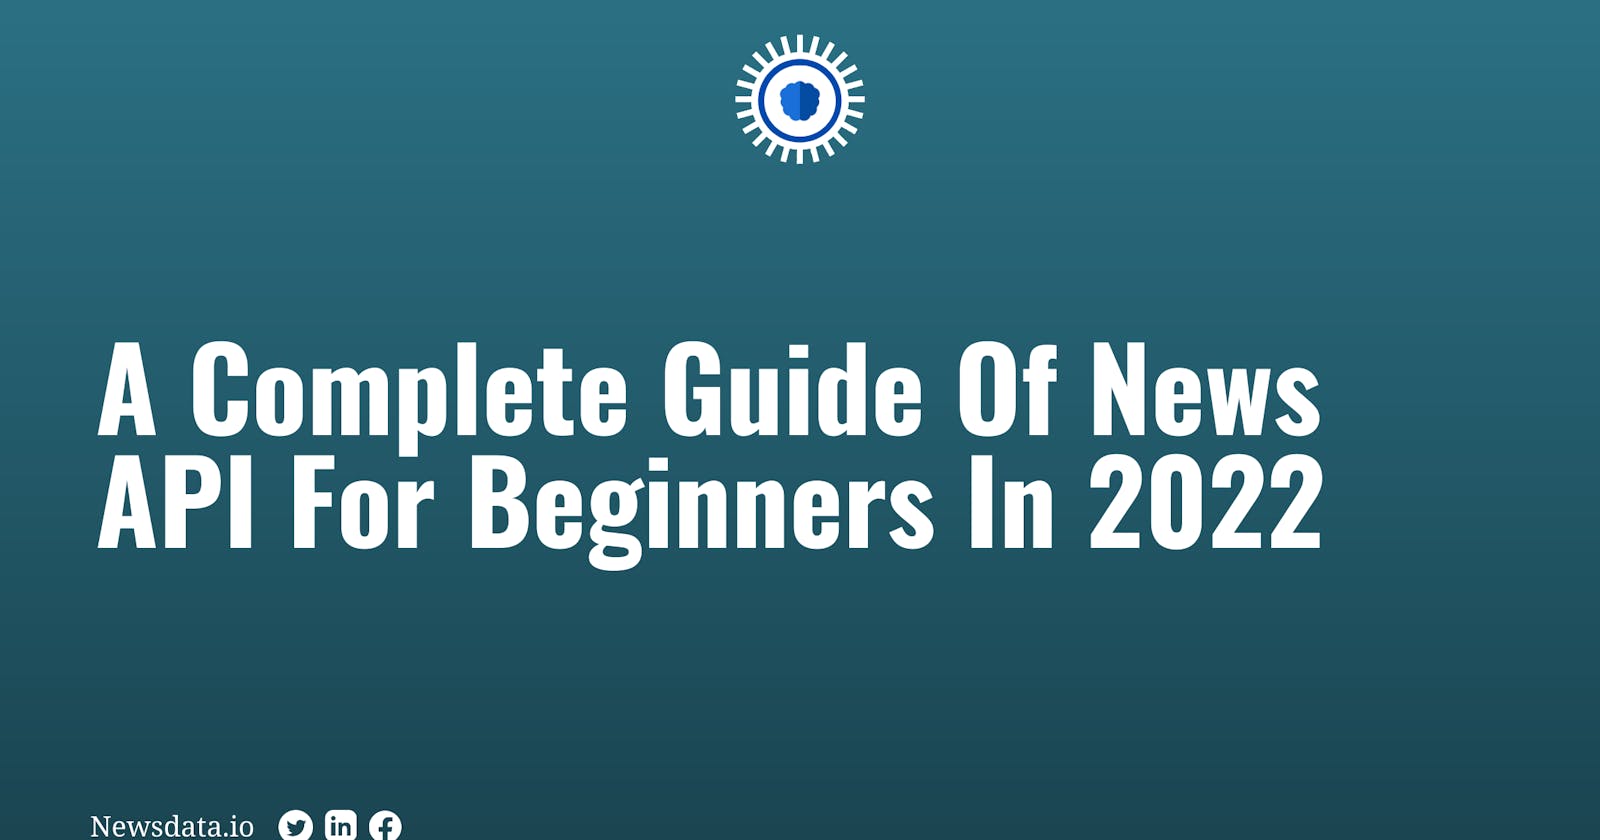 A Complete Guide Of News API For Beginners In 2022